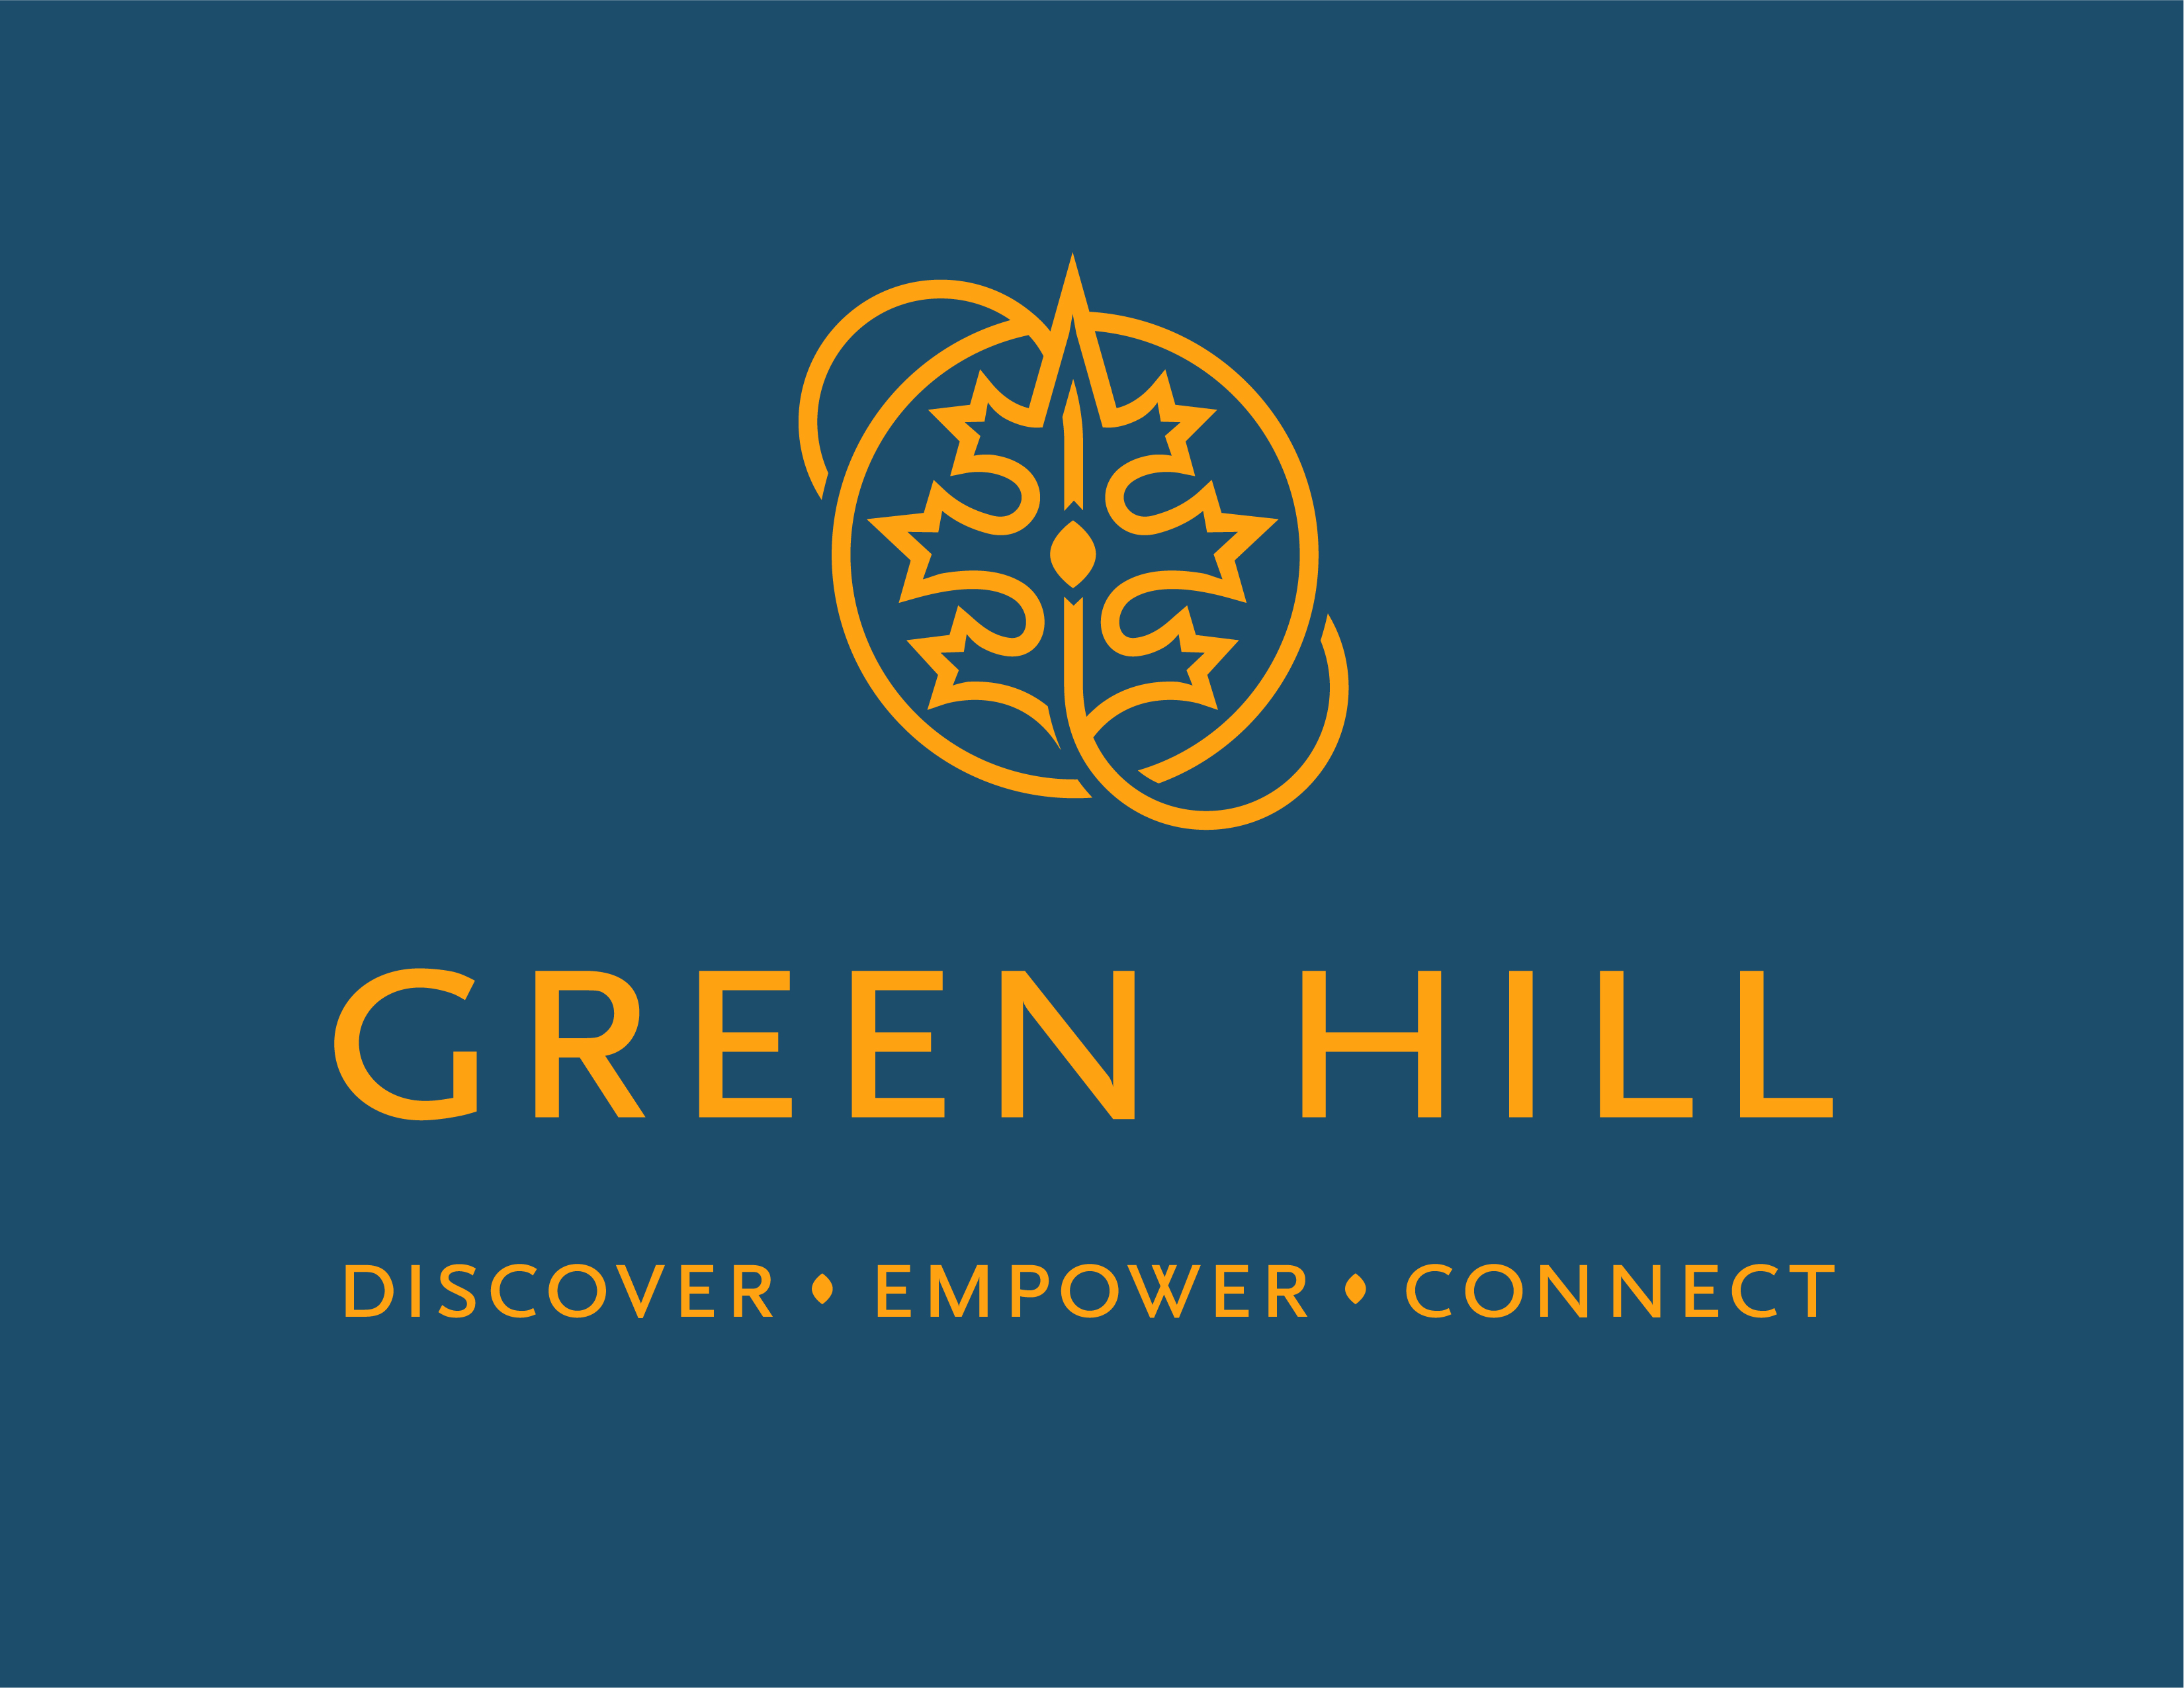 Green Hill Recovery logo with discover, empower & connect.